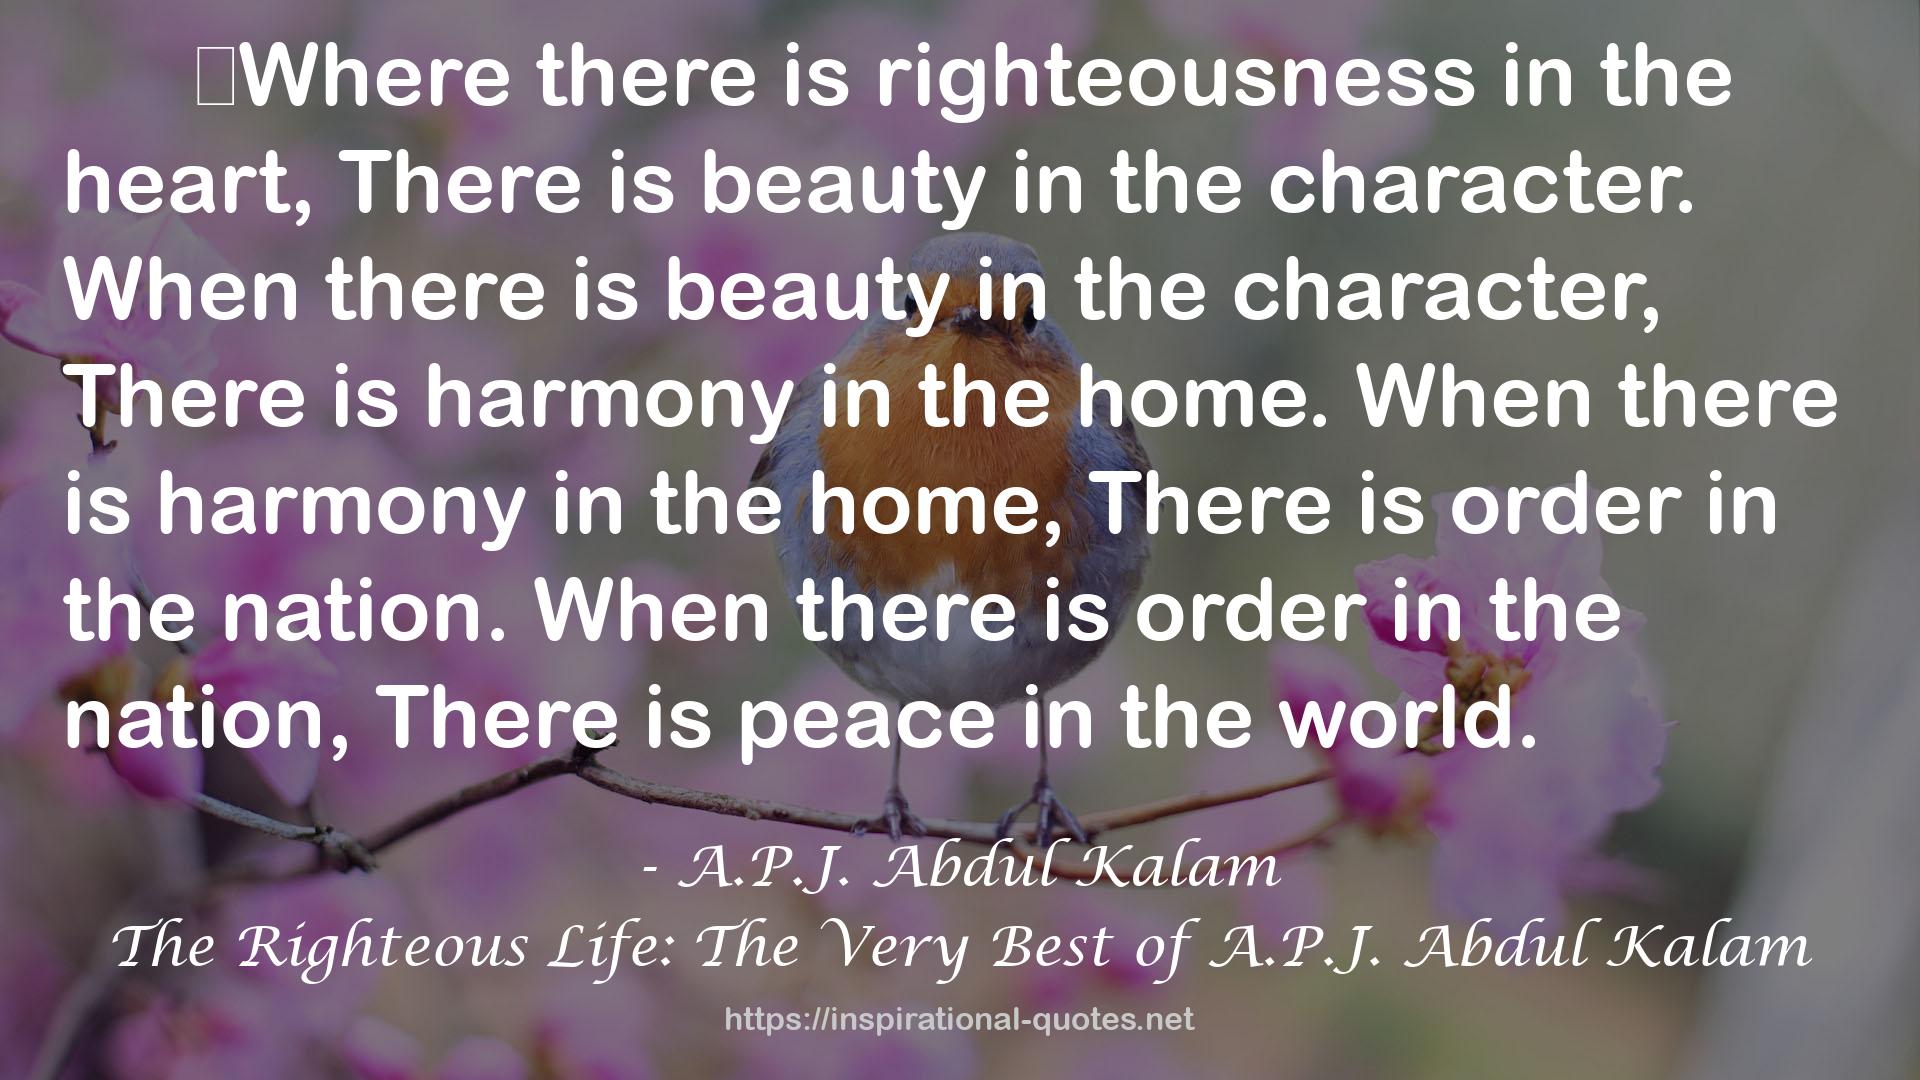 The Righteous Life: The Very Best of A.P.J. Abdul Kalam QUOTES